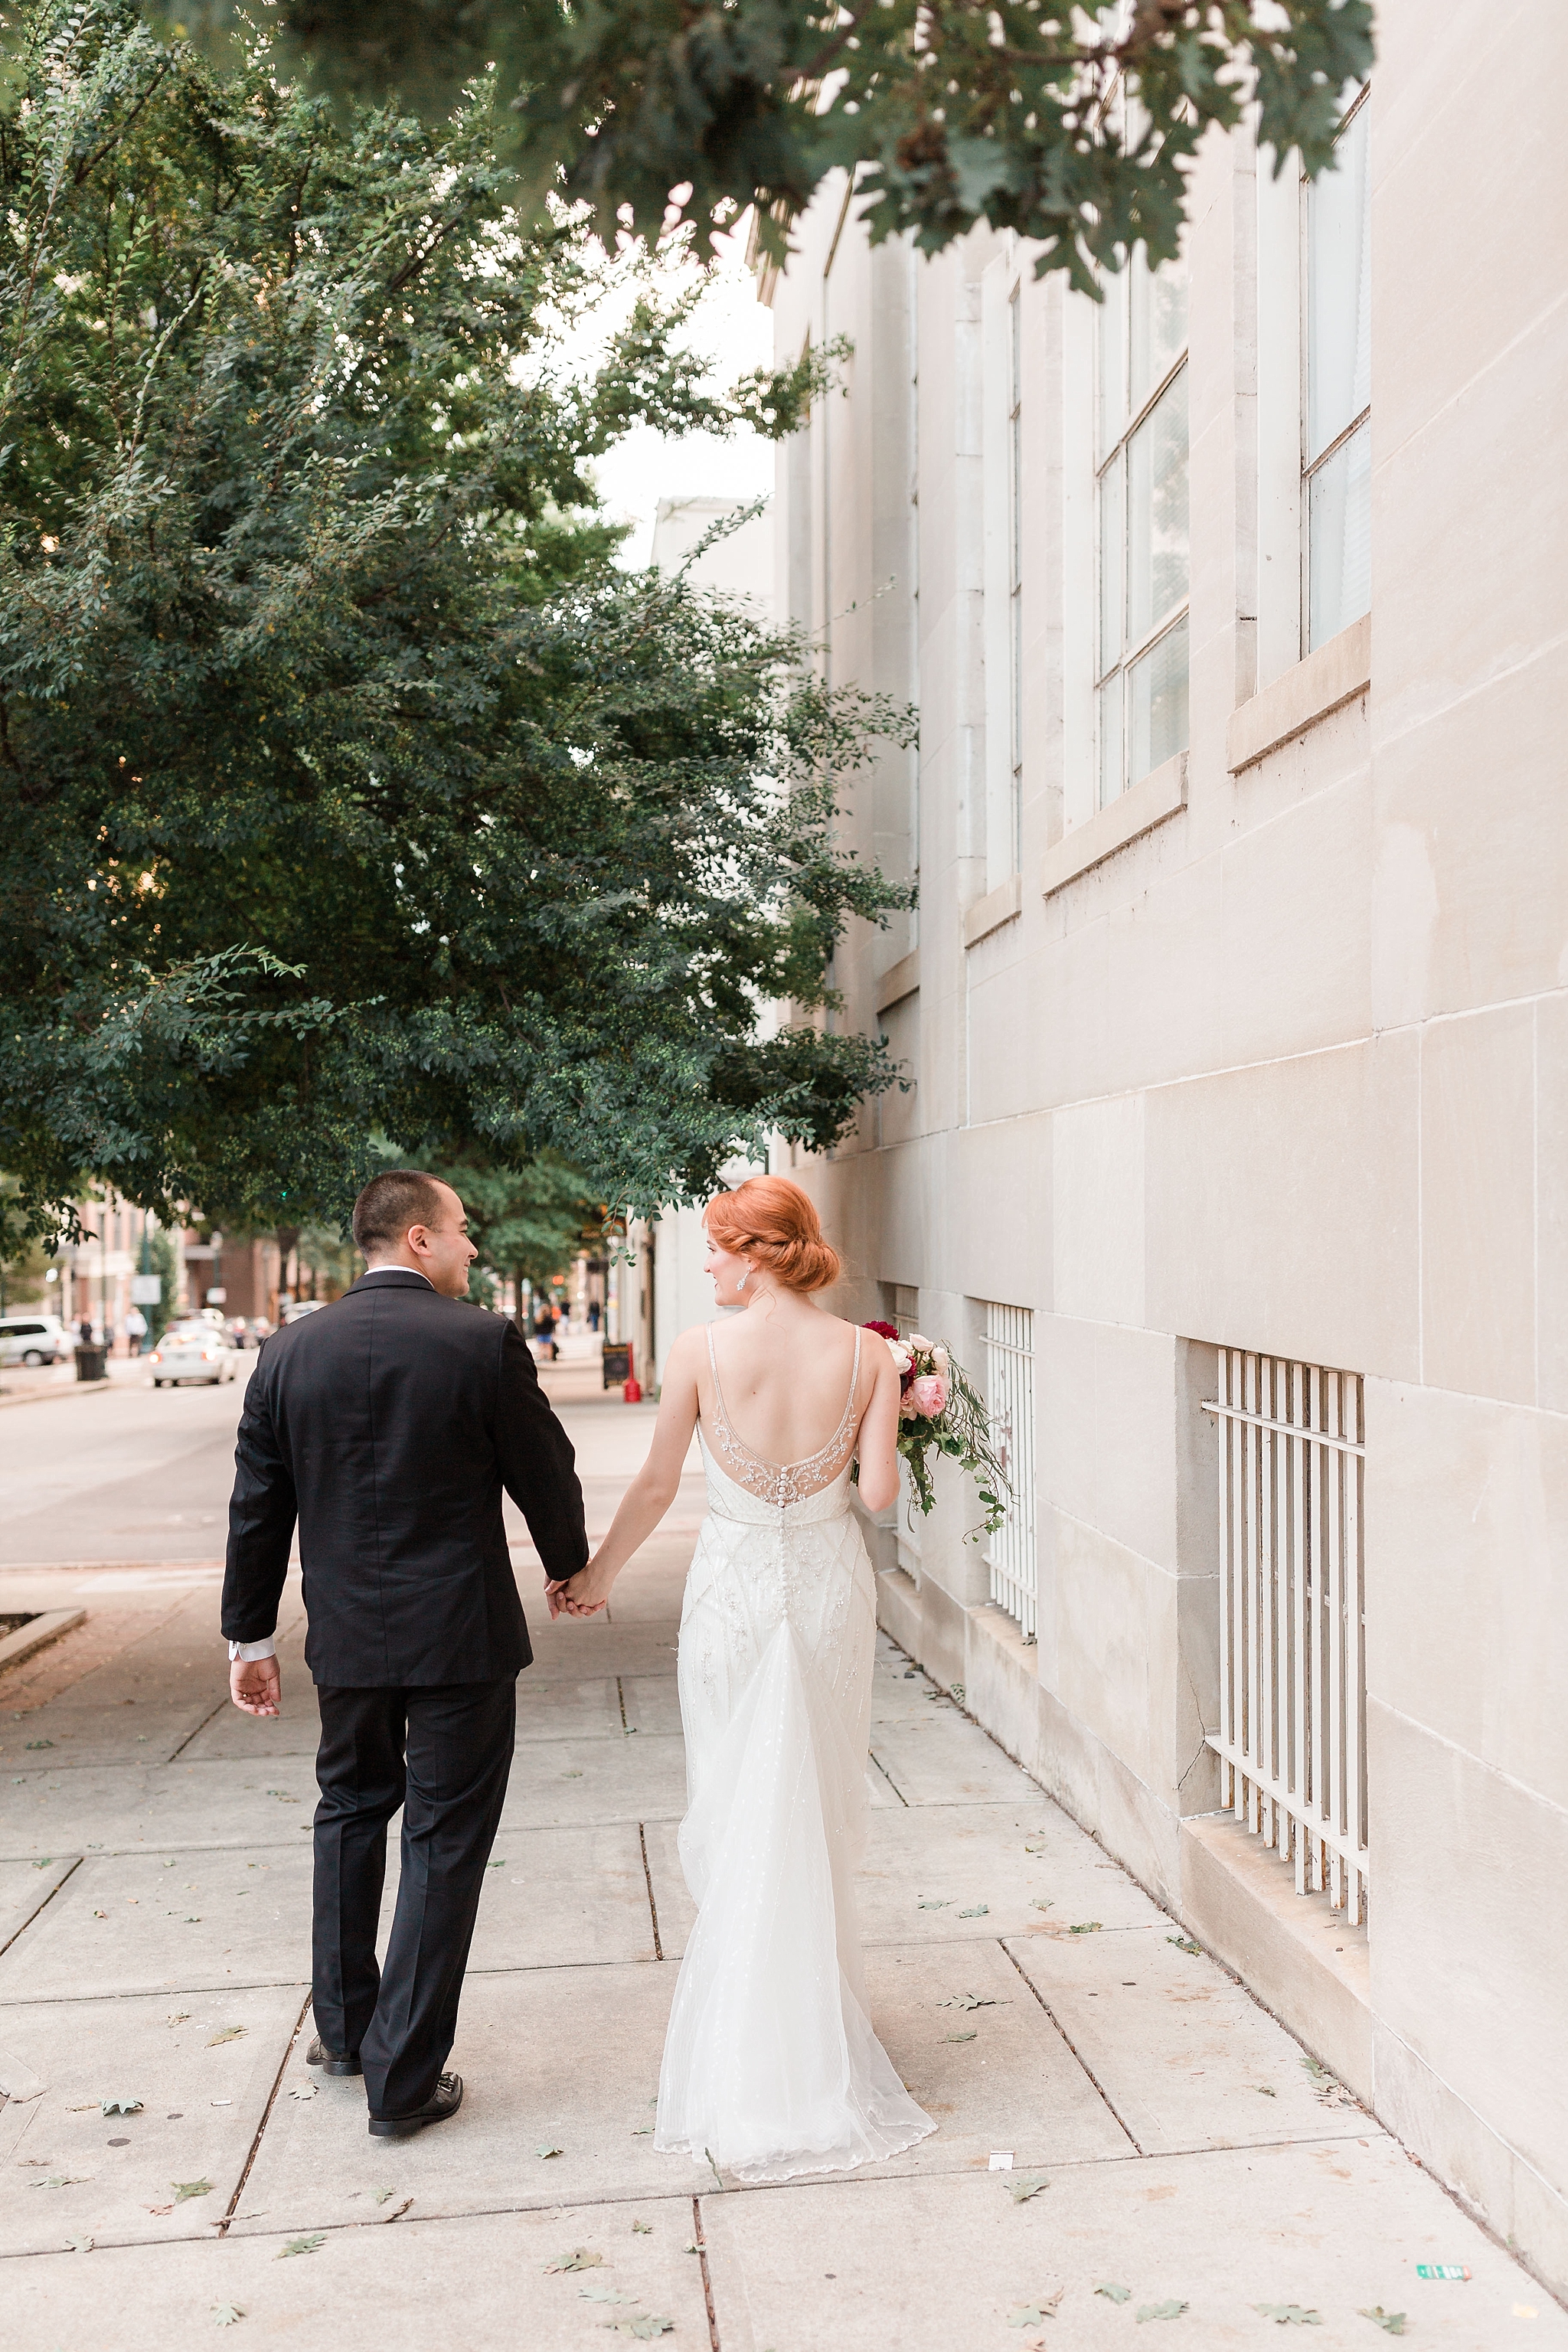 These September "I do's" took place during an art-deco inspired wedding at the John Marshall Ballrooms in Richmond, VA.